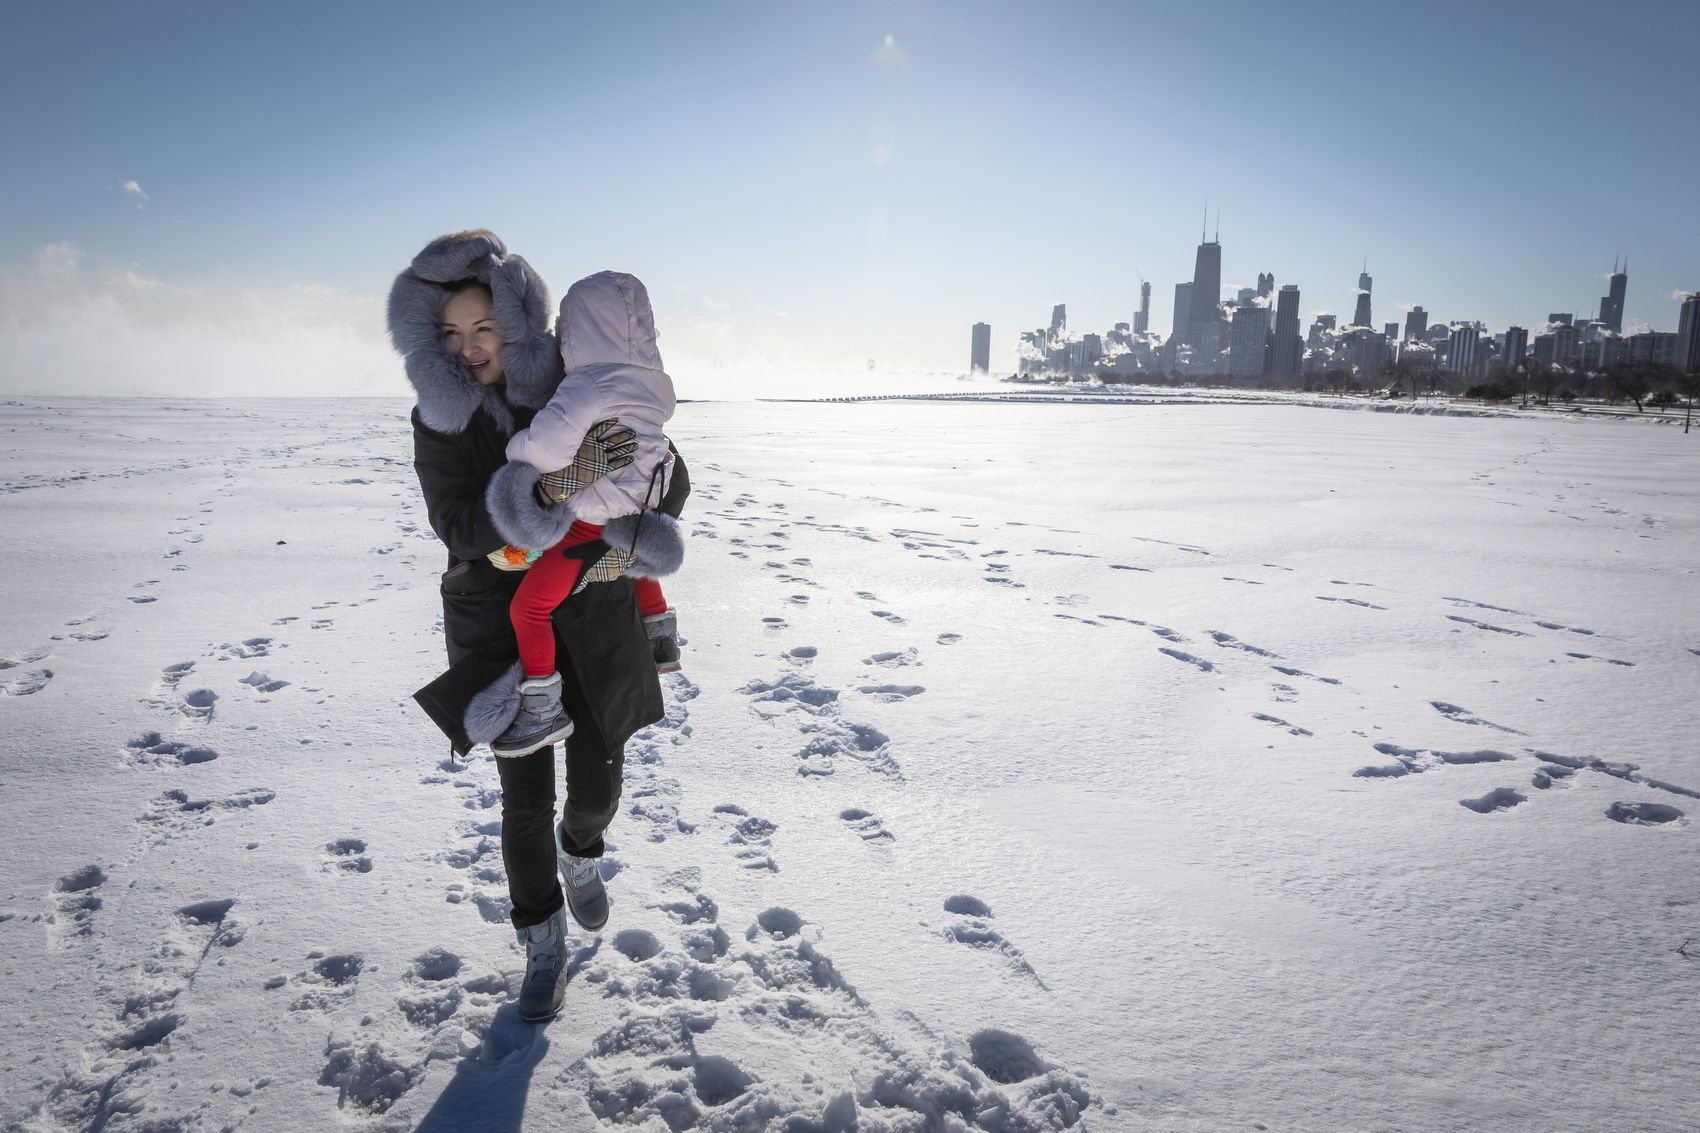 Chicago residents visit the Lakefront of Lake Michigan during the polar vortex on Jan, 30, 2019. Wednesday marks the coldest day in Chicago history. From the crackling Lakefront to the city’s El stops, locals took on the record breaking wind chills. The polar vortex that brought the Chicago area to a halt in January will now be remembered as producing the state’s coldest temperature ever, according to weather officials. Manuel Martinez/WBEZ